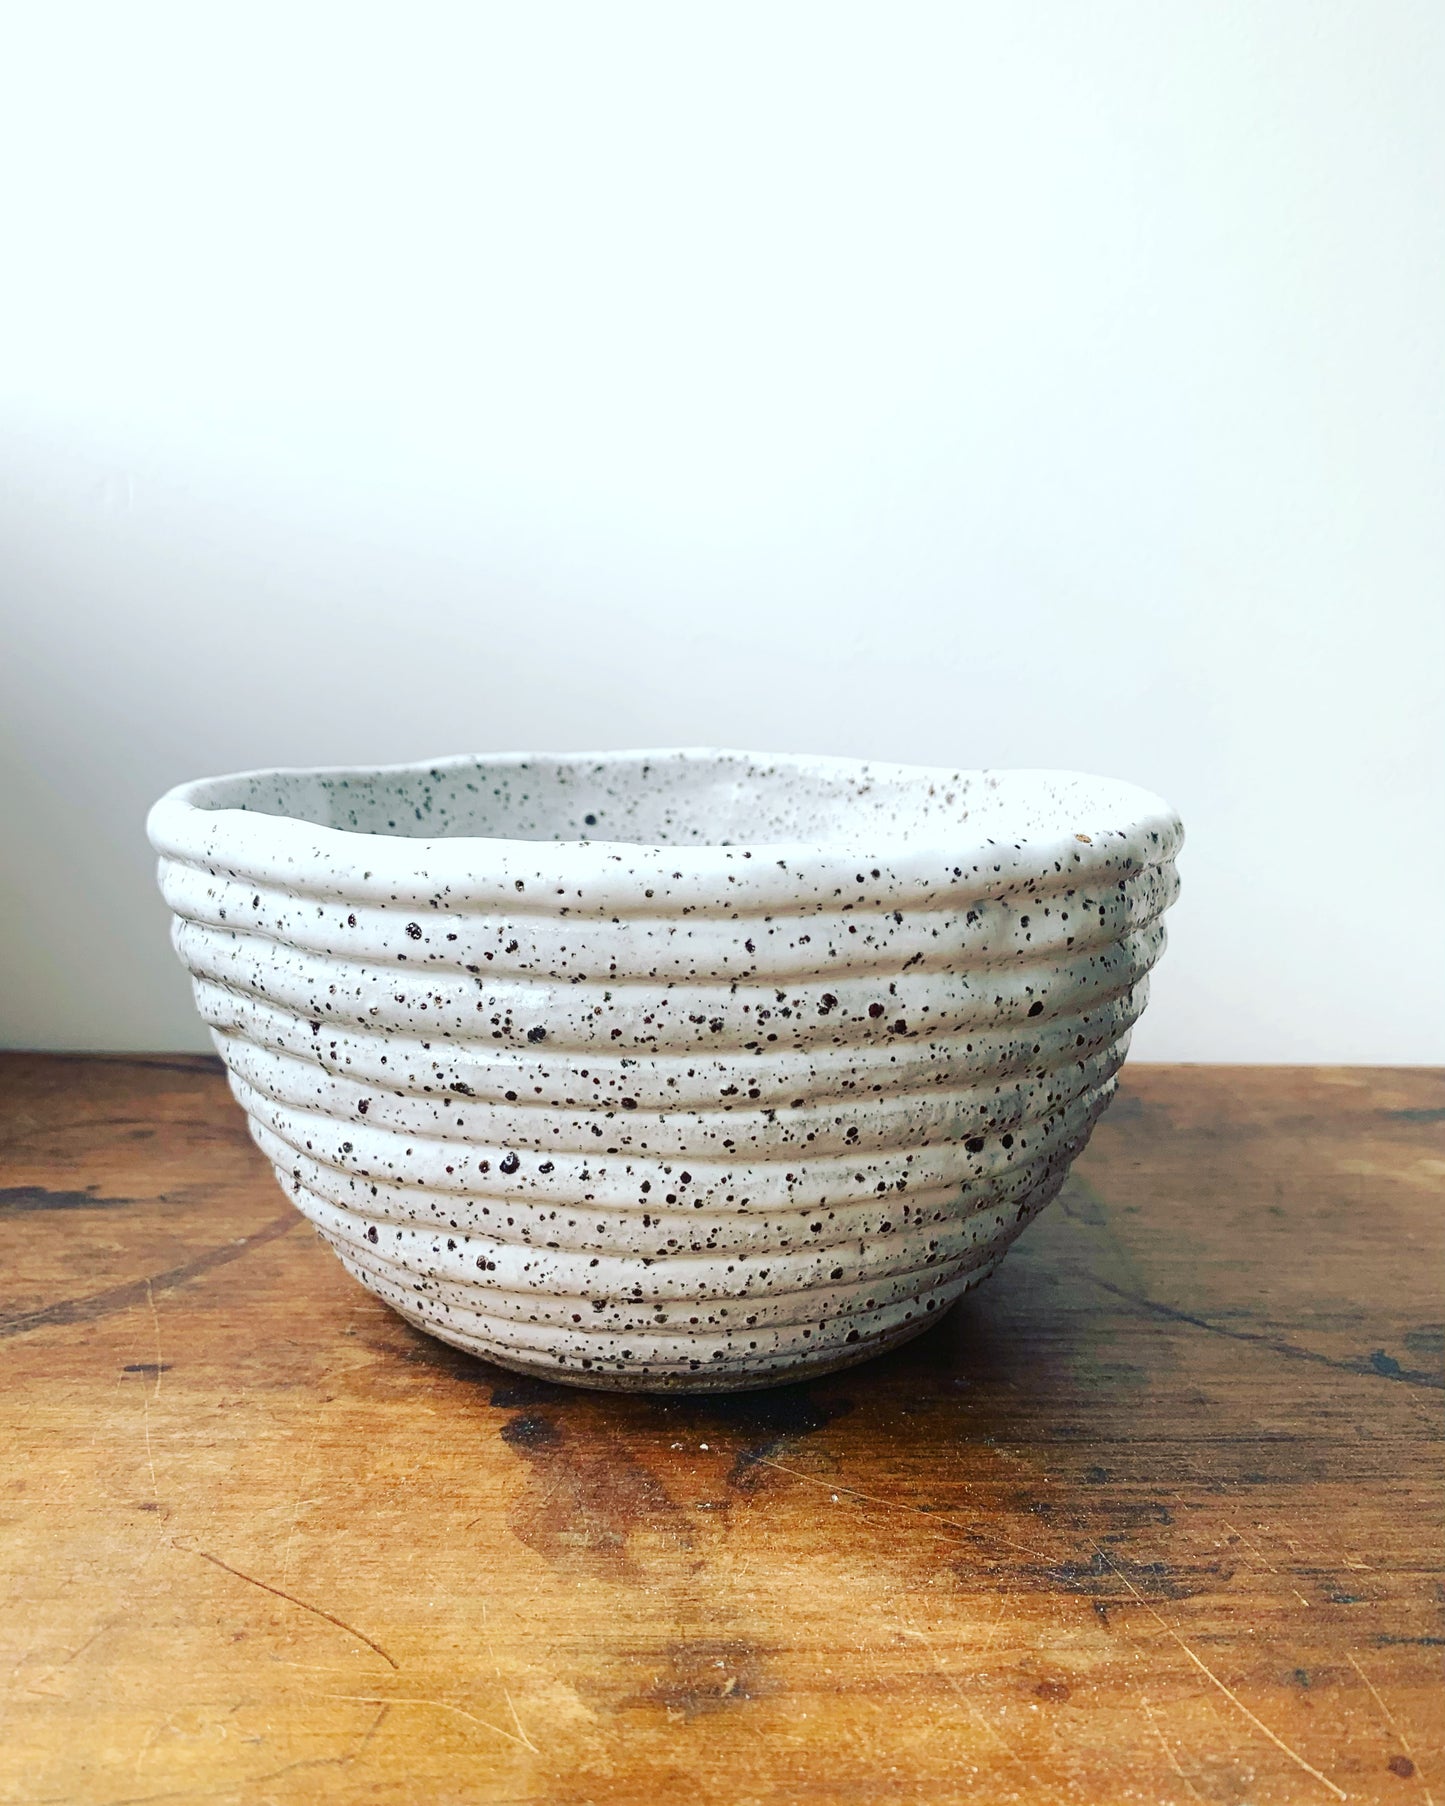 Rustic coiled bowl